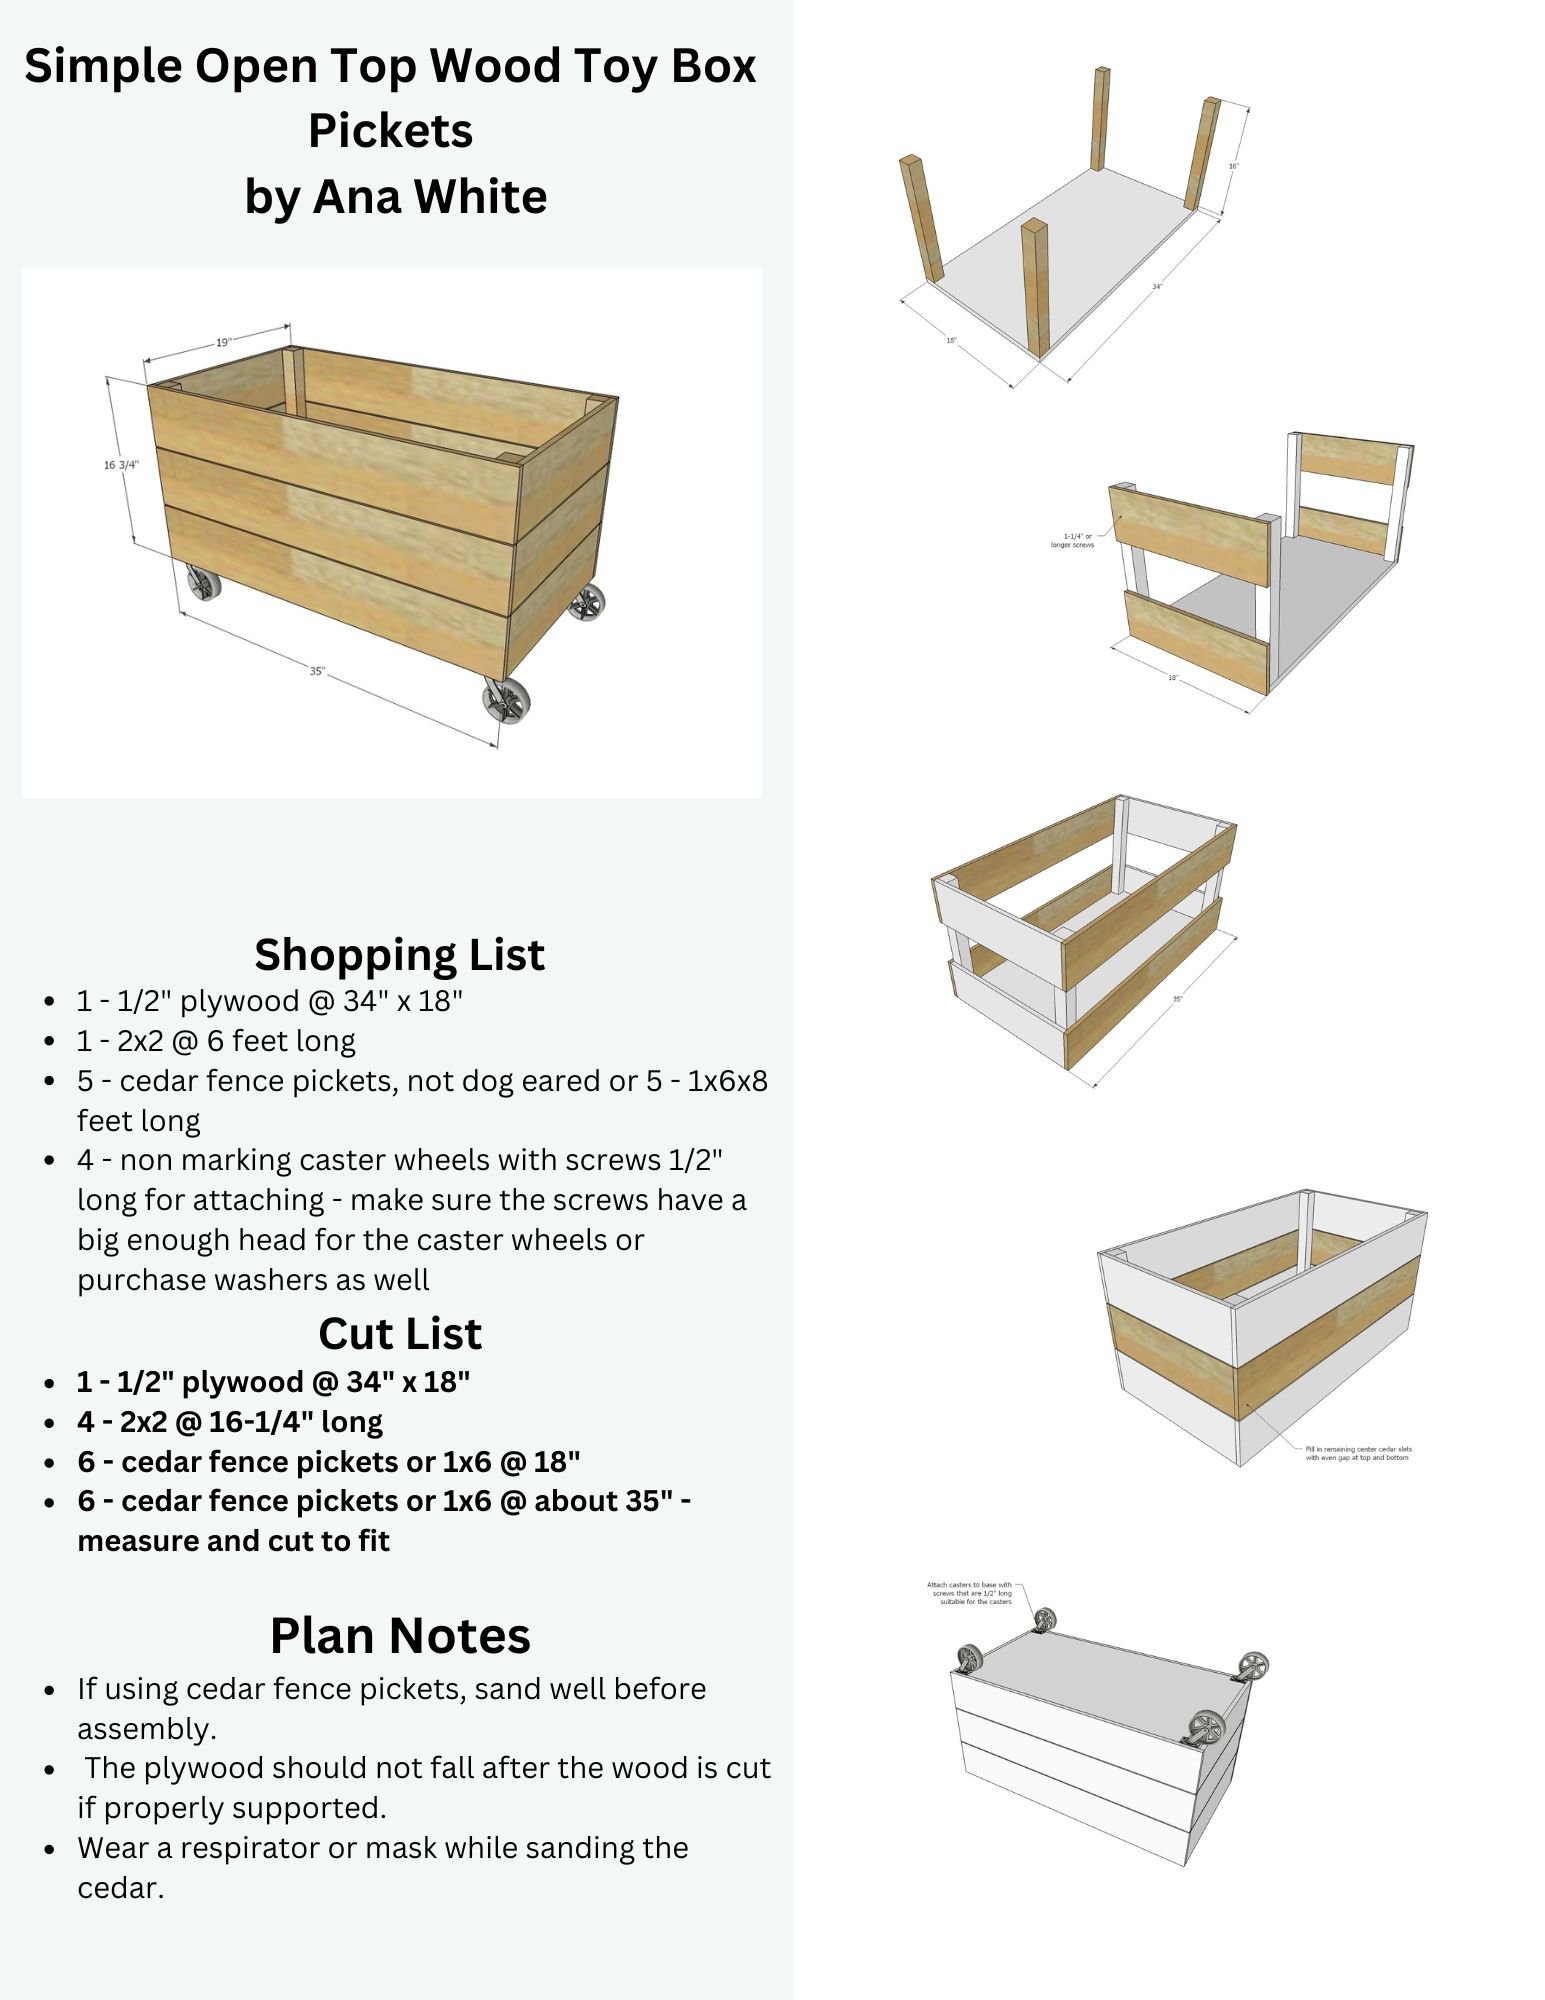 Simple Open Top Wood Toy Box Plans